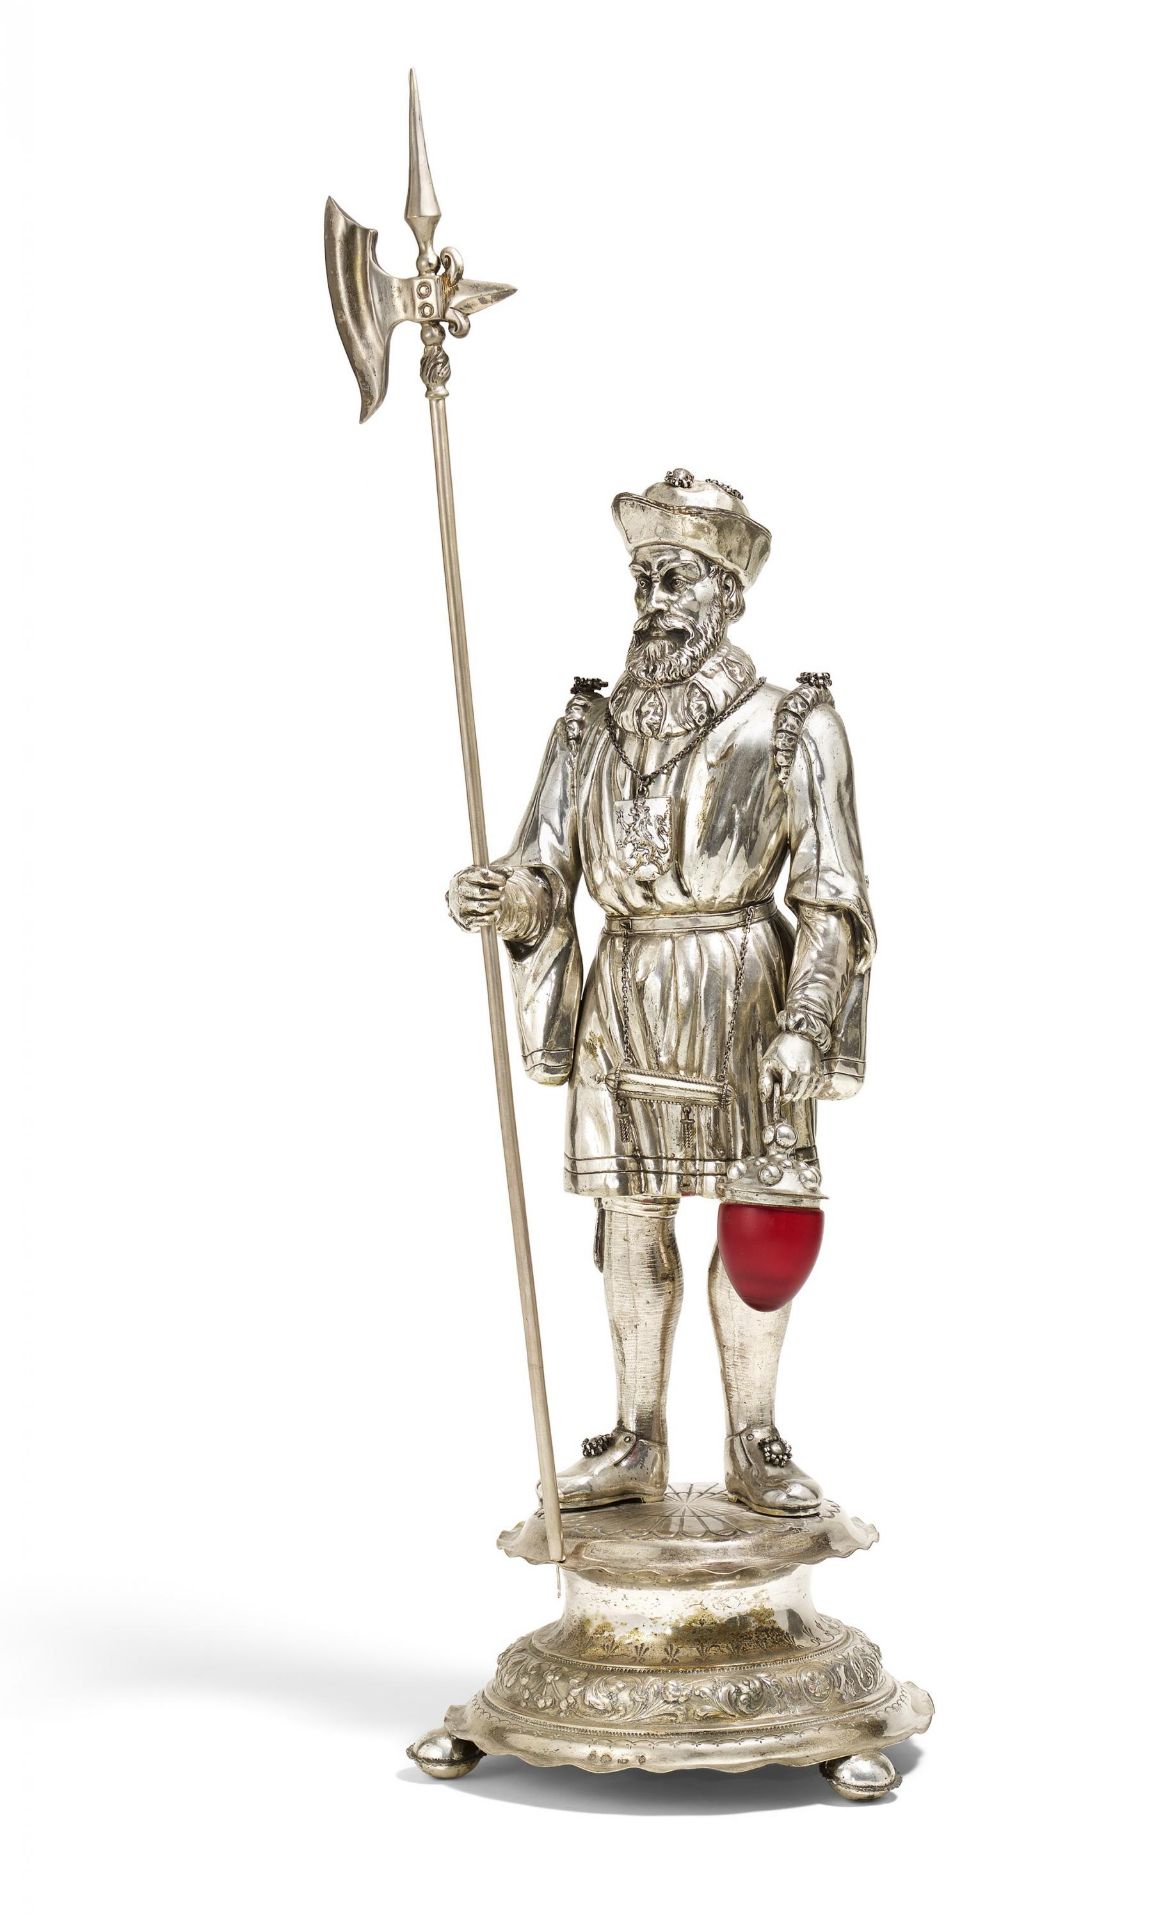 LARGE HISTORISM FIGURINE OF A NIGHT WATCHMAN WITH HALBERD MADE OF SILVER AND RED GLASS. Hanau. Date: